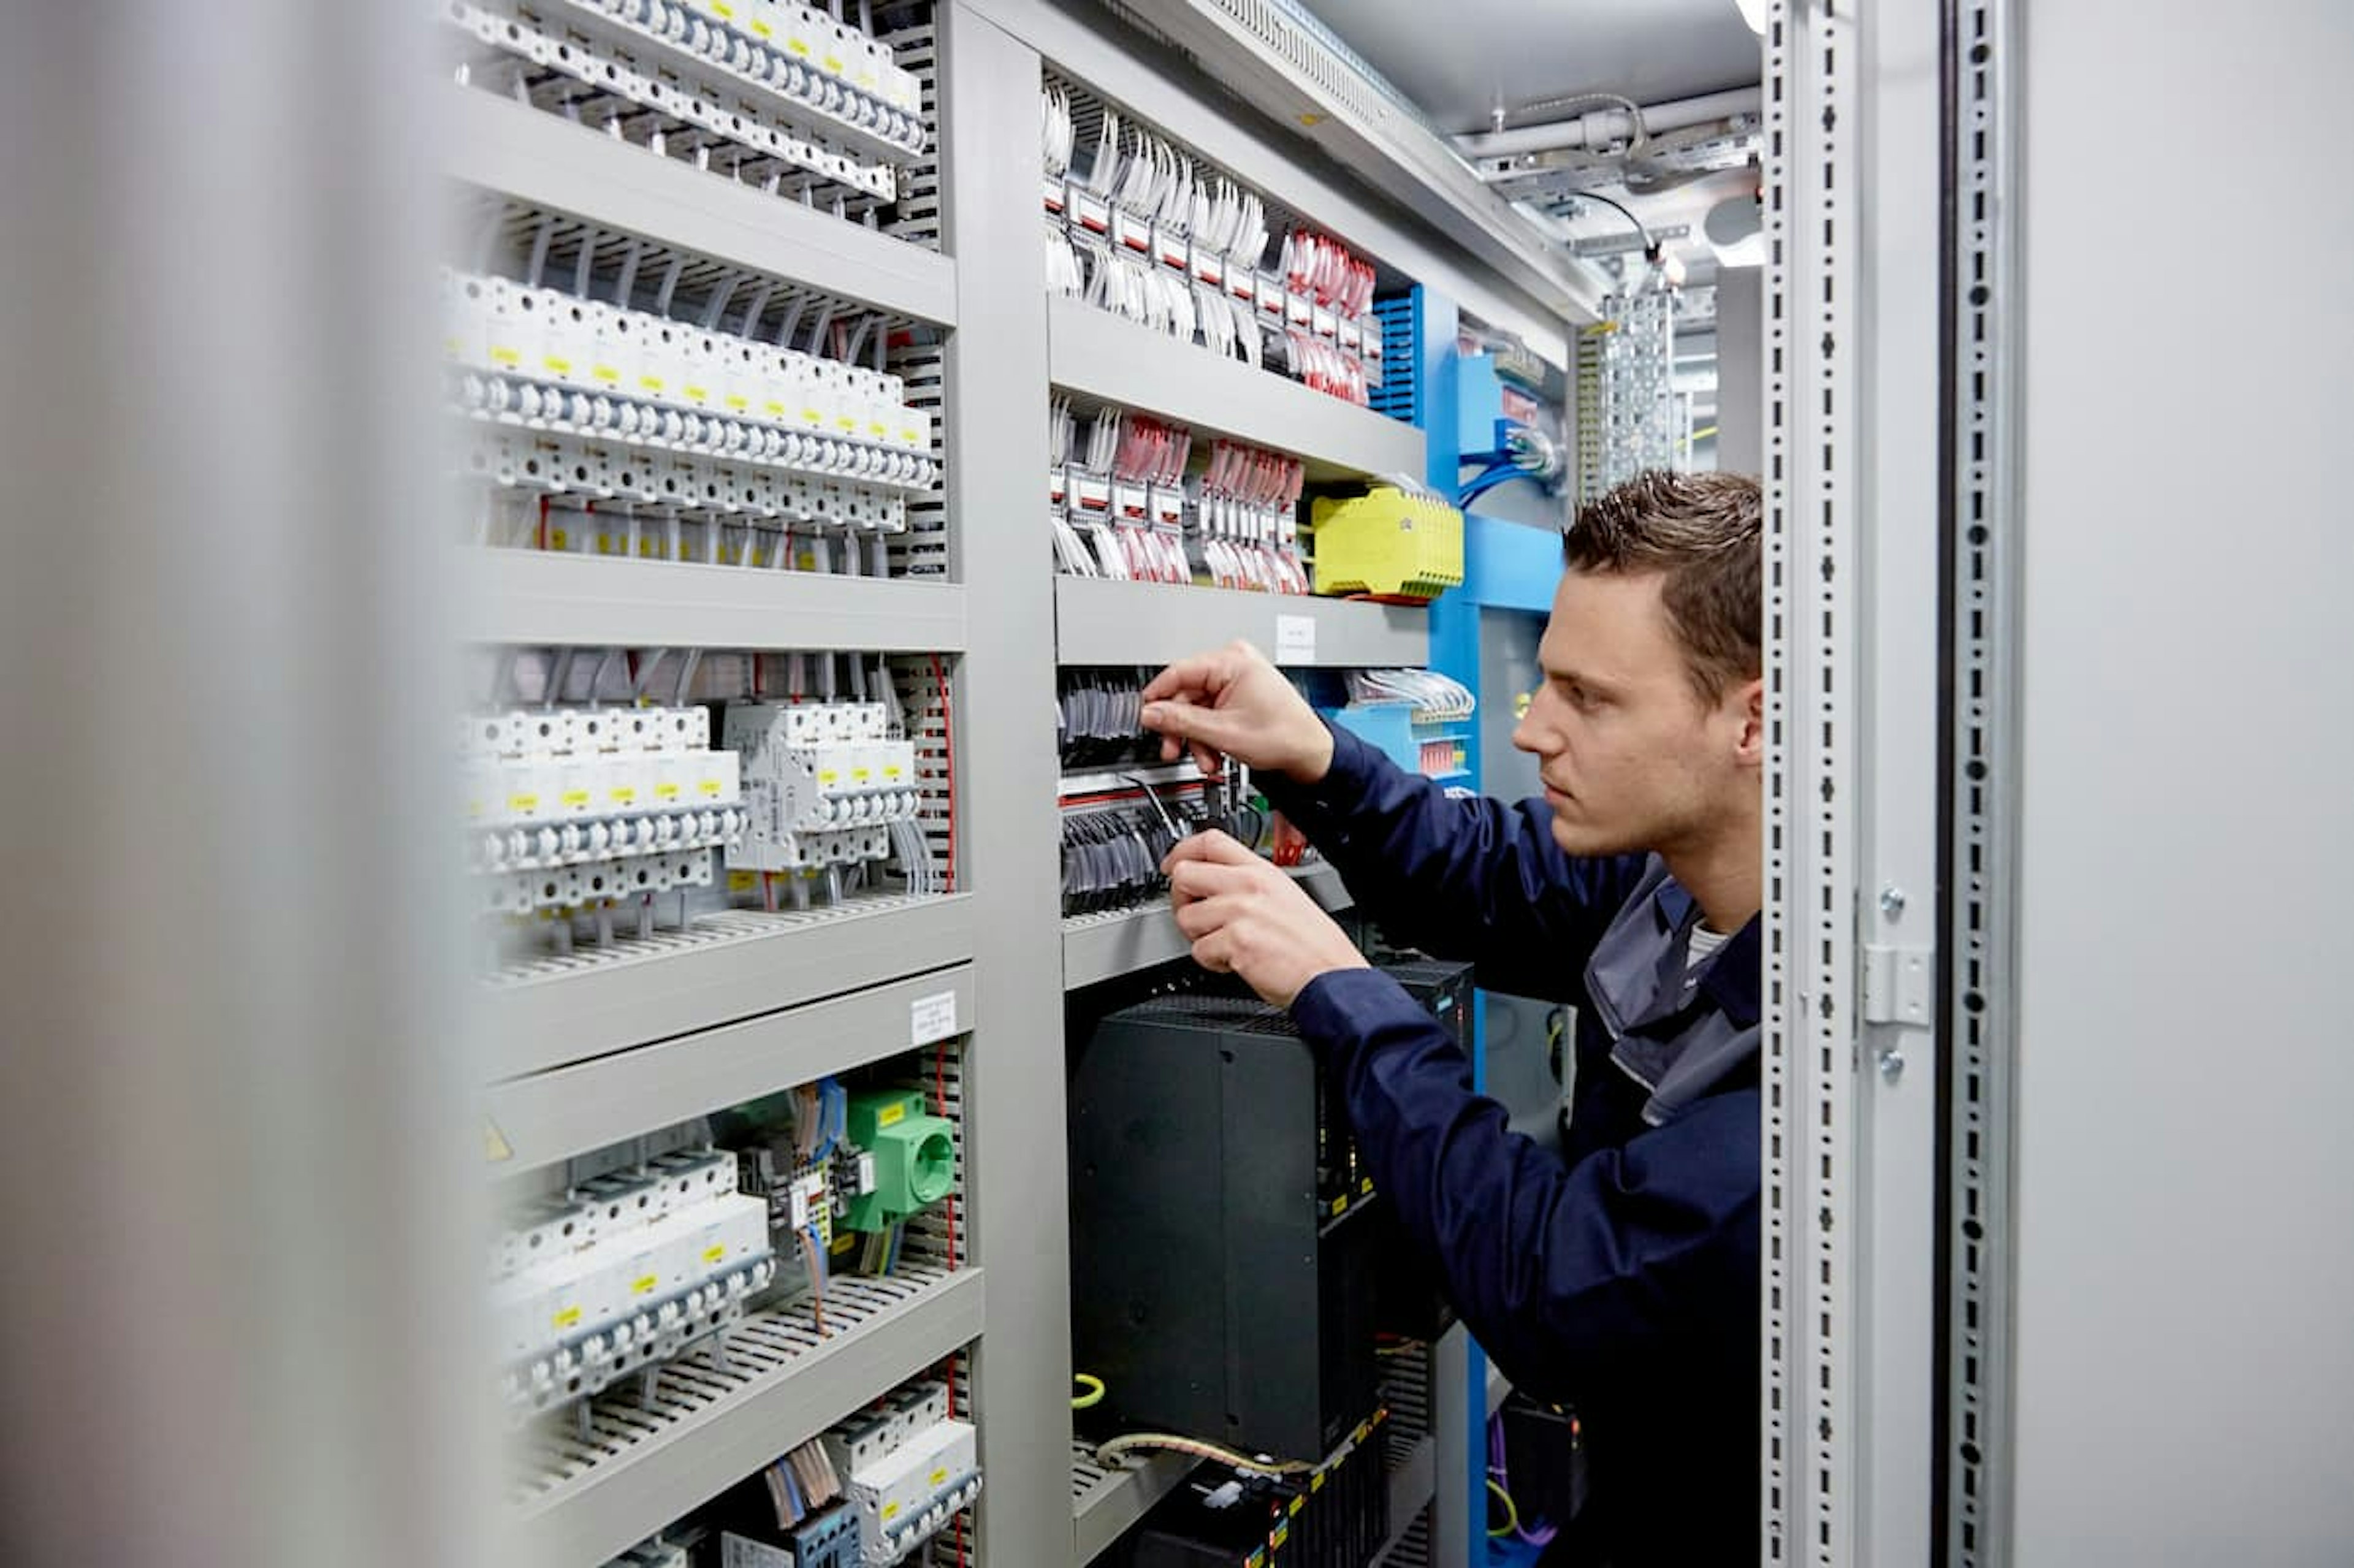 Electro Technician at work